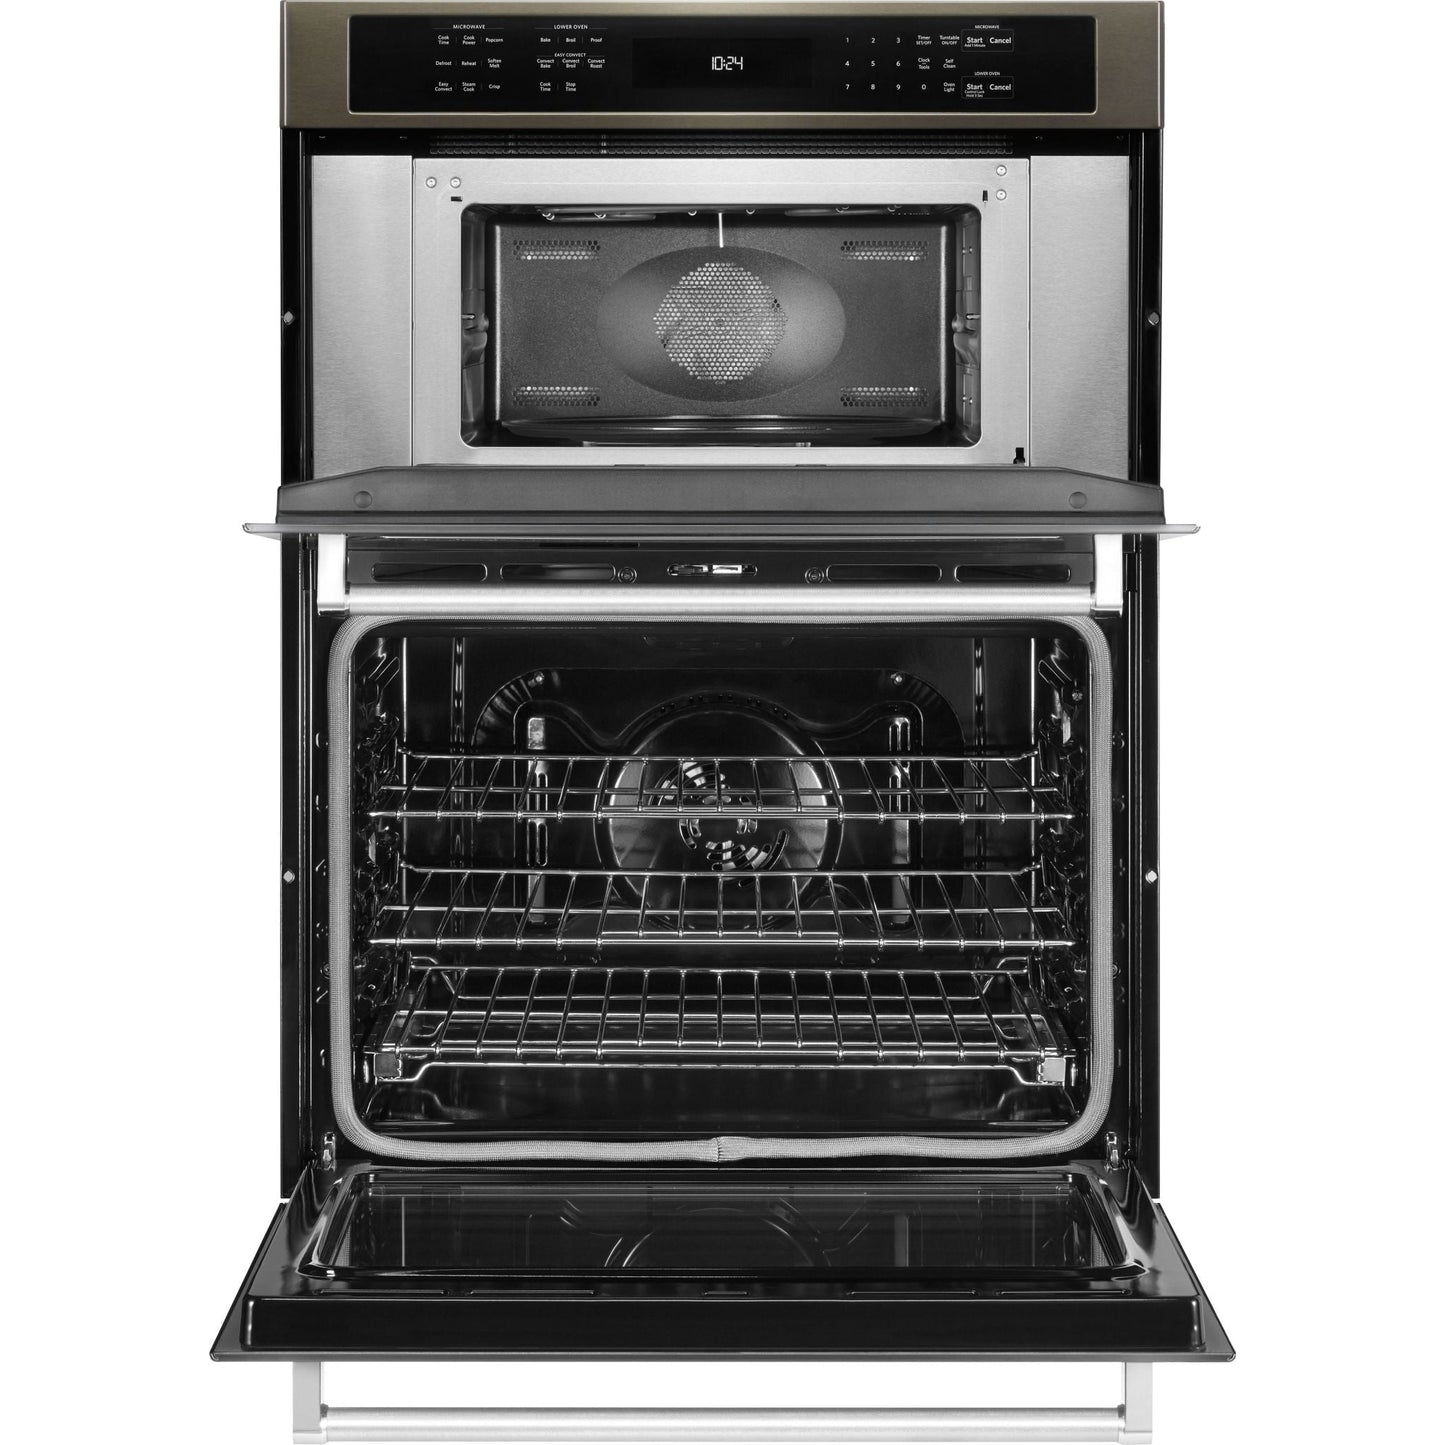 KitchenAid 30" Double Wall Oven (KODE500ESS) - Stainless